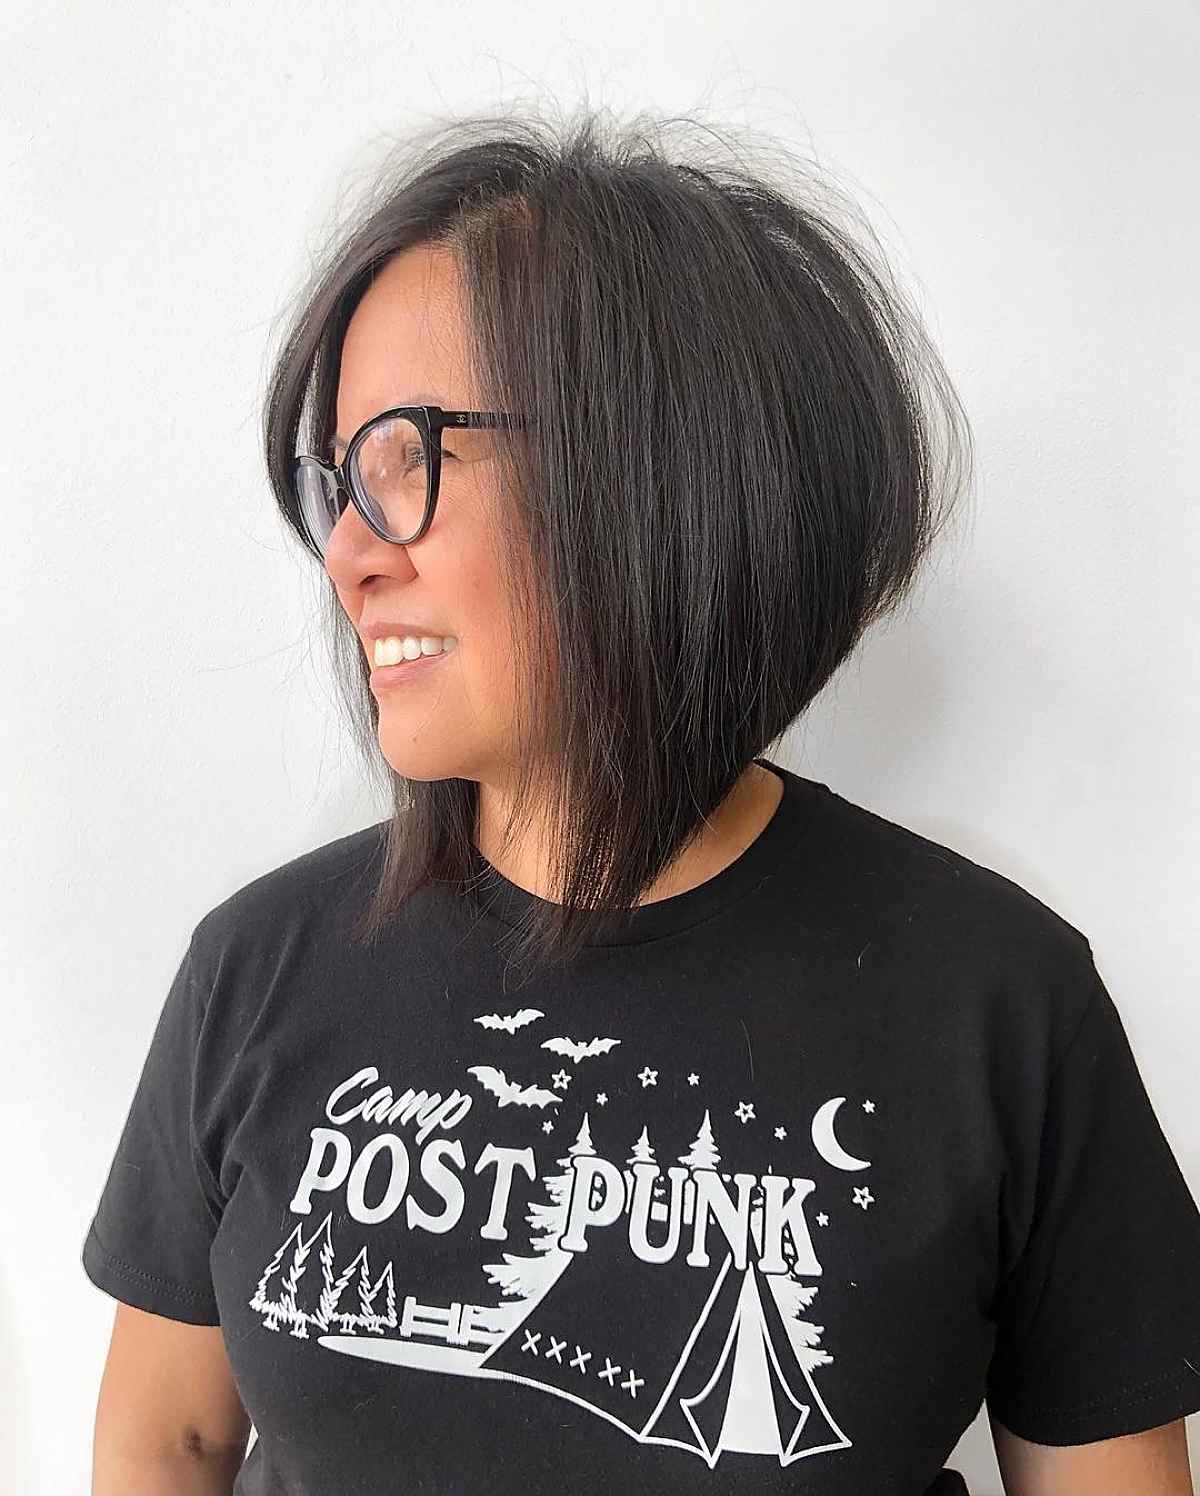 Long Angled Bob for Older Women with Glasses